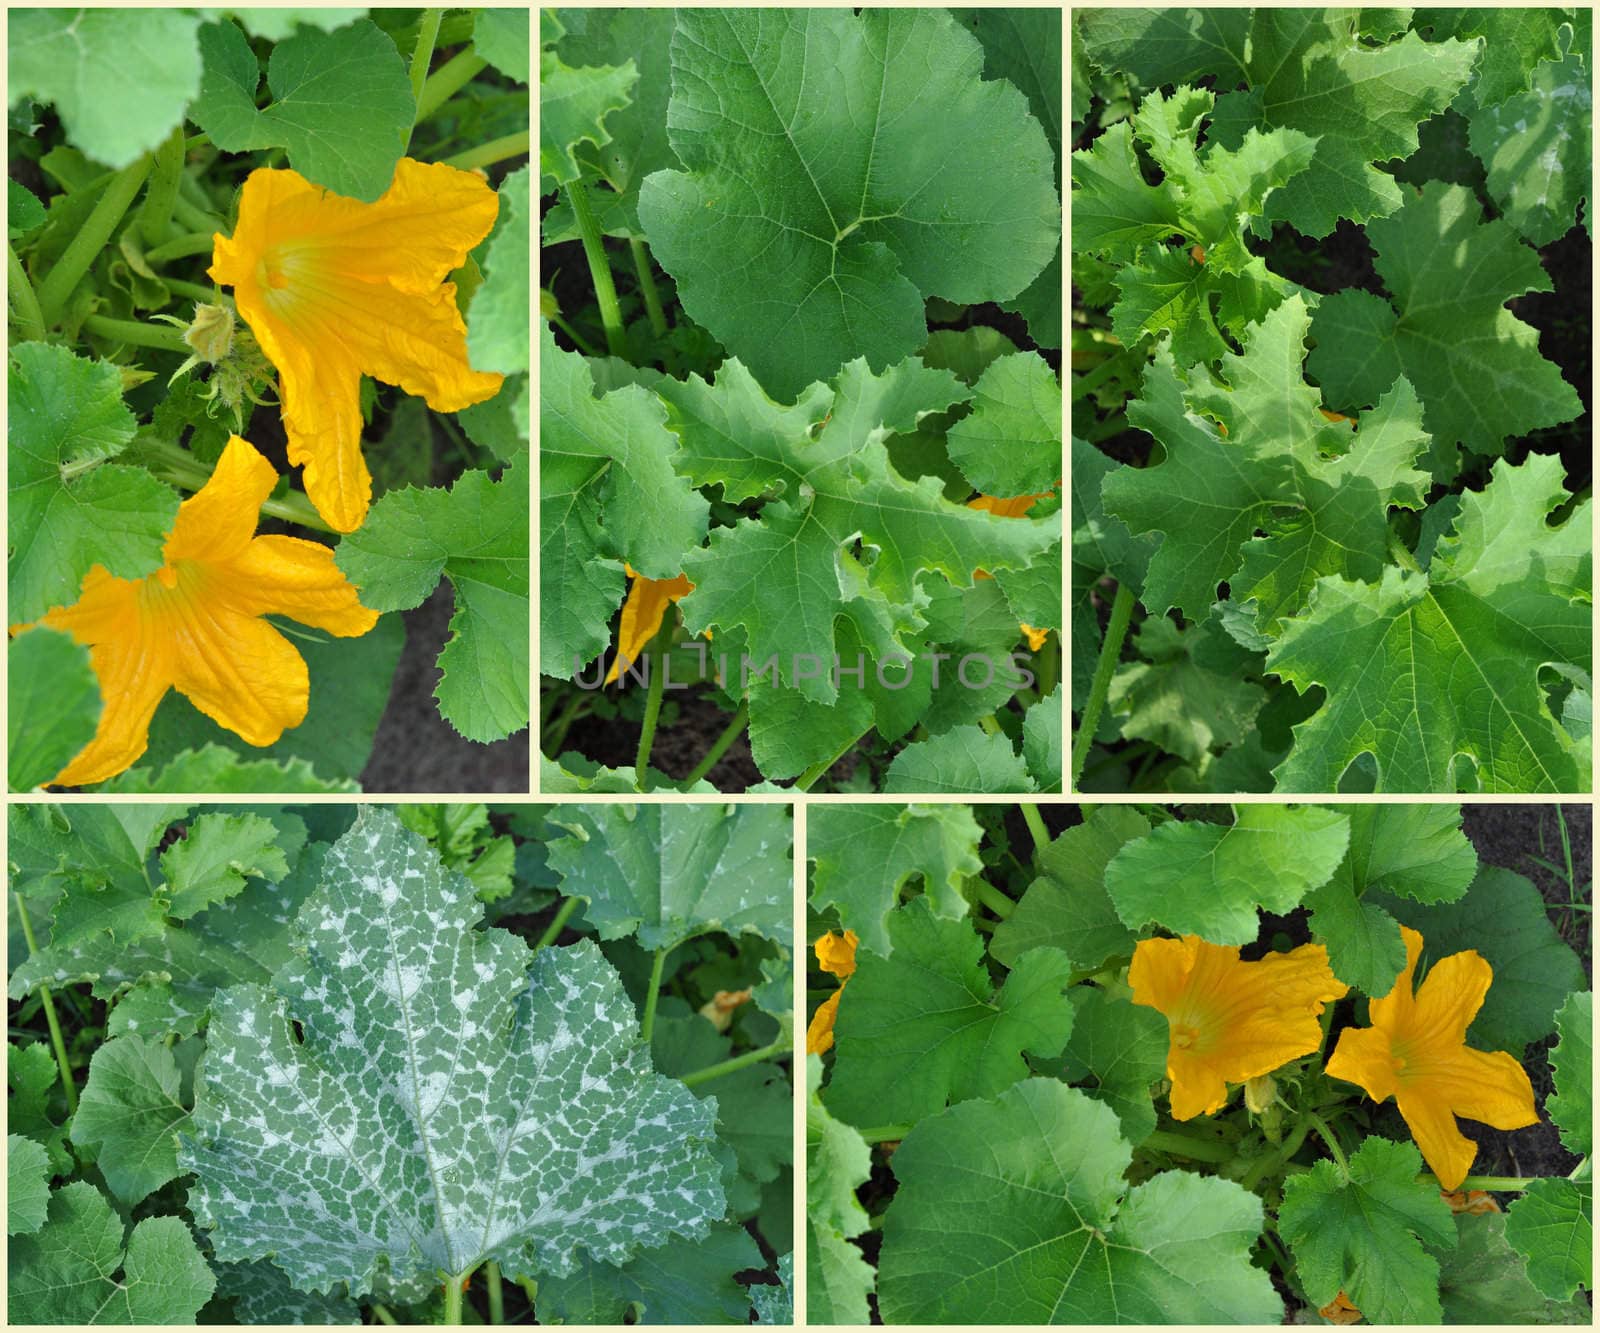 Leaves and flowers of vegetable marrows, July, central Russia, set